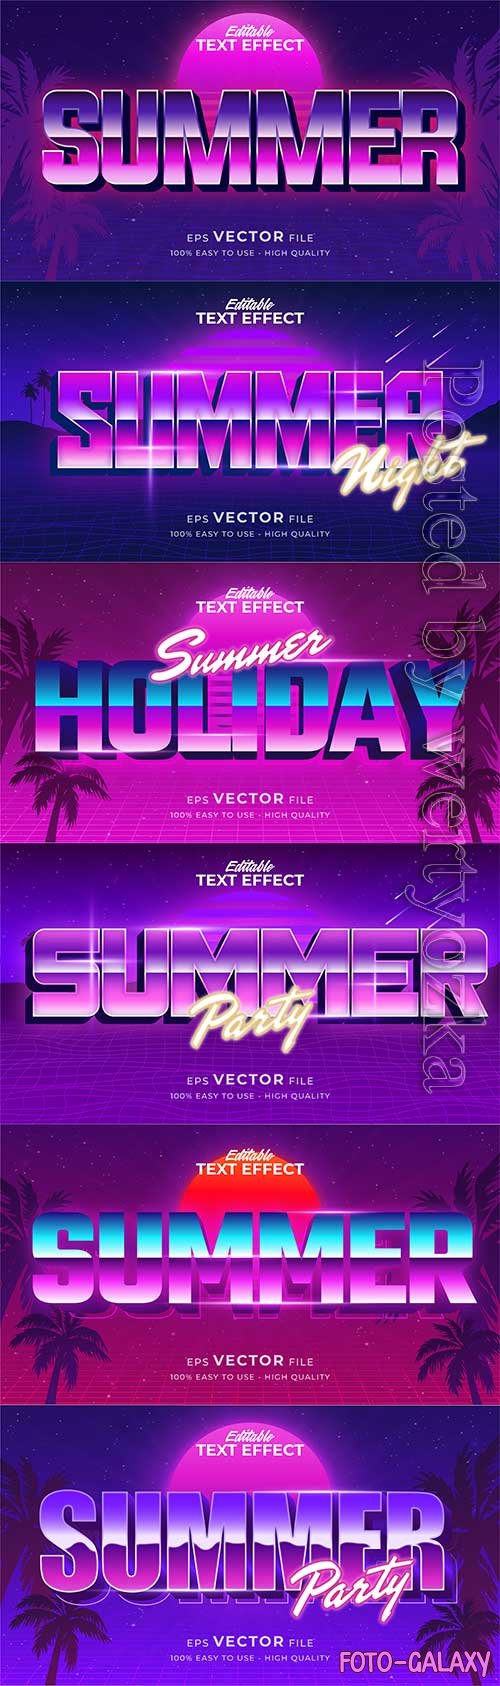 Retro summer holiday text in grunge style theme in vector vol 12